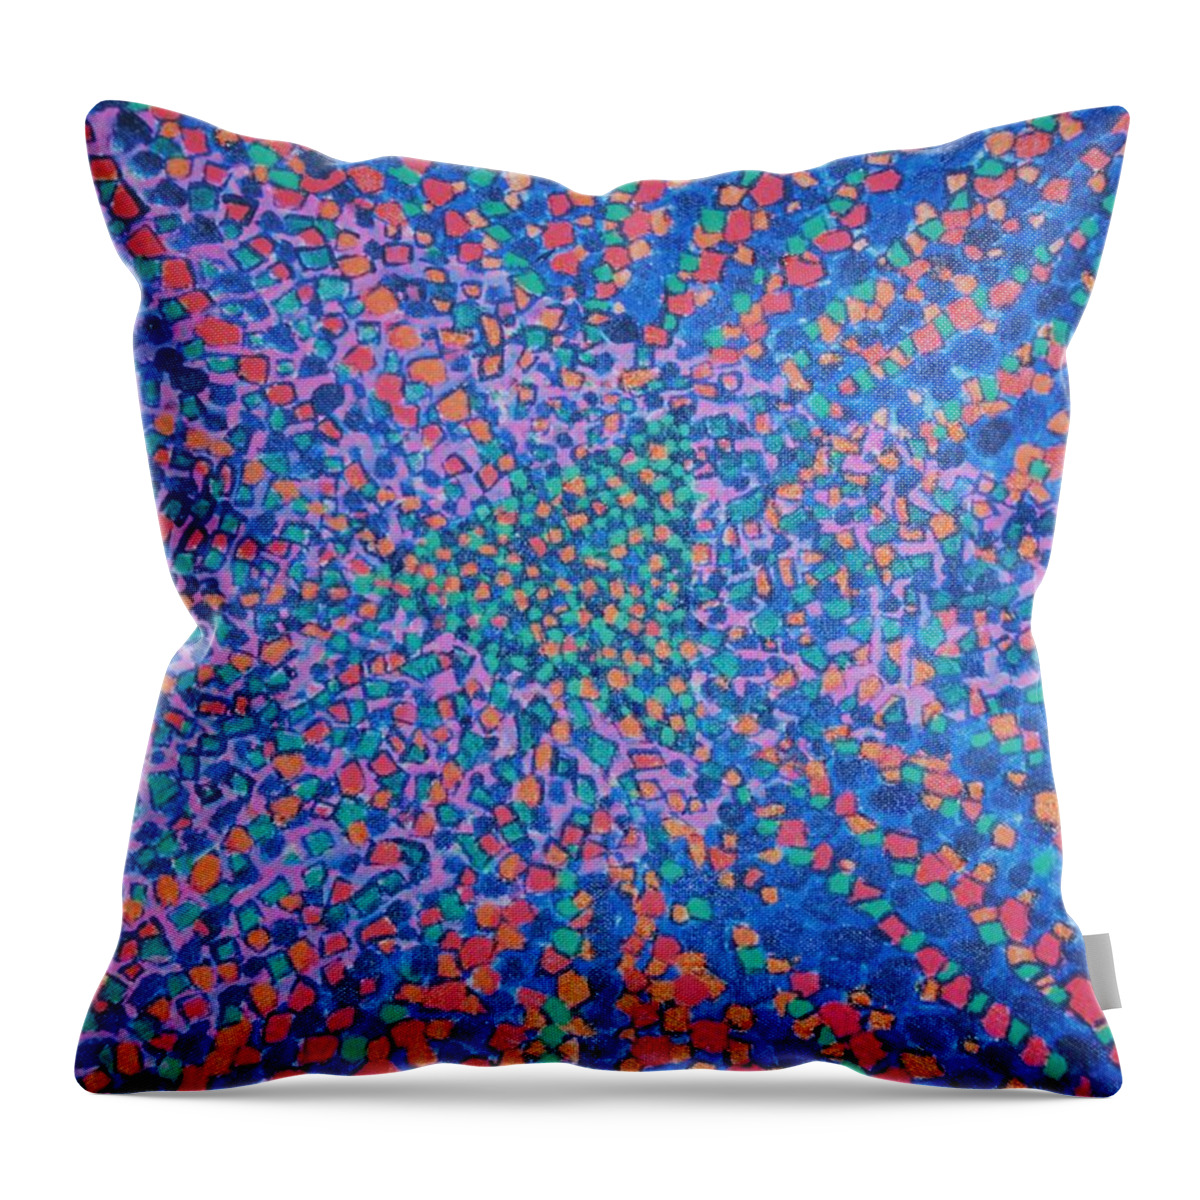 Inspirational Throw Pillow featuring the painting Mobius Band #6 by Kyung Hee Hogg